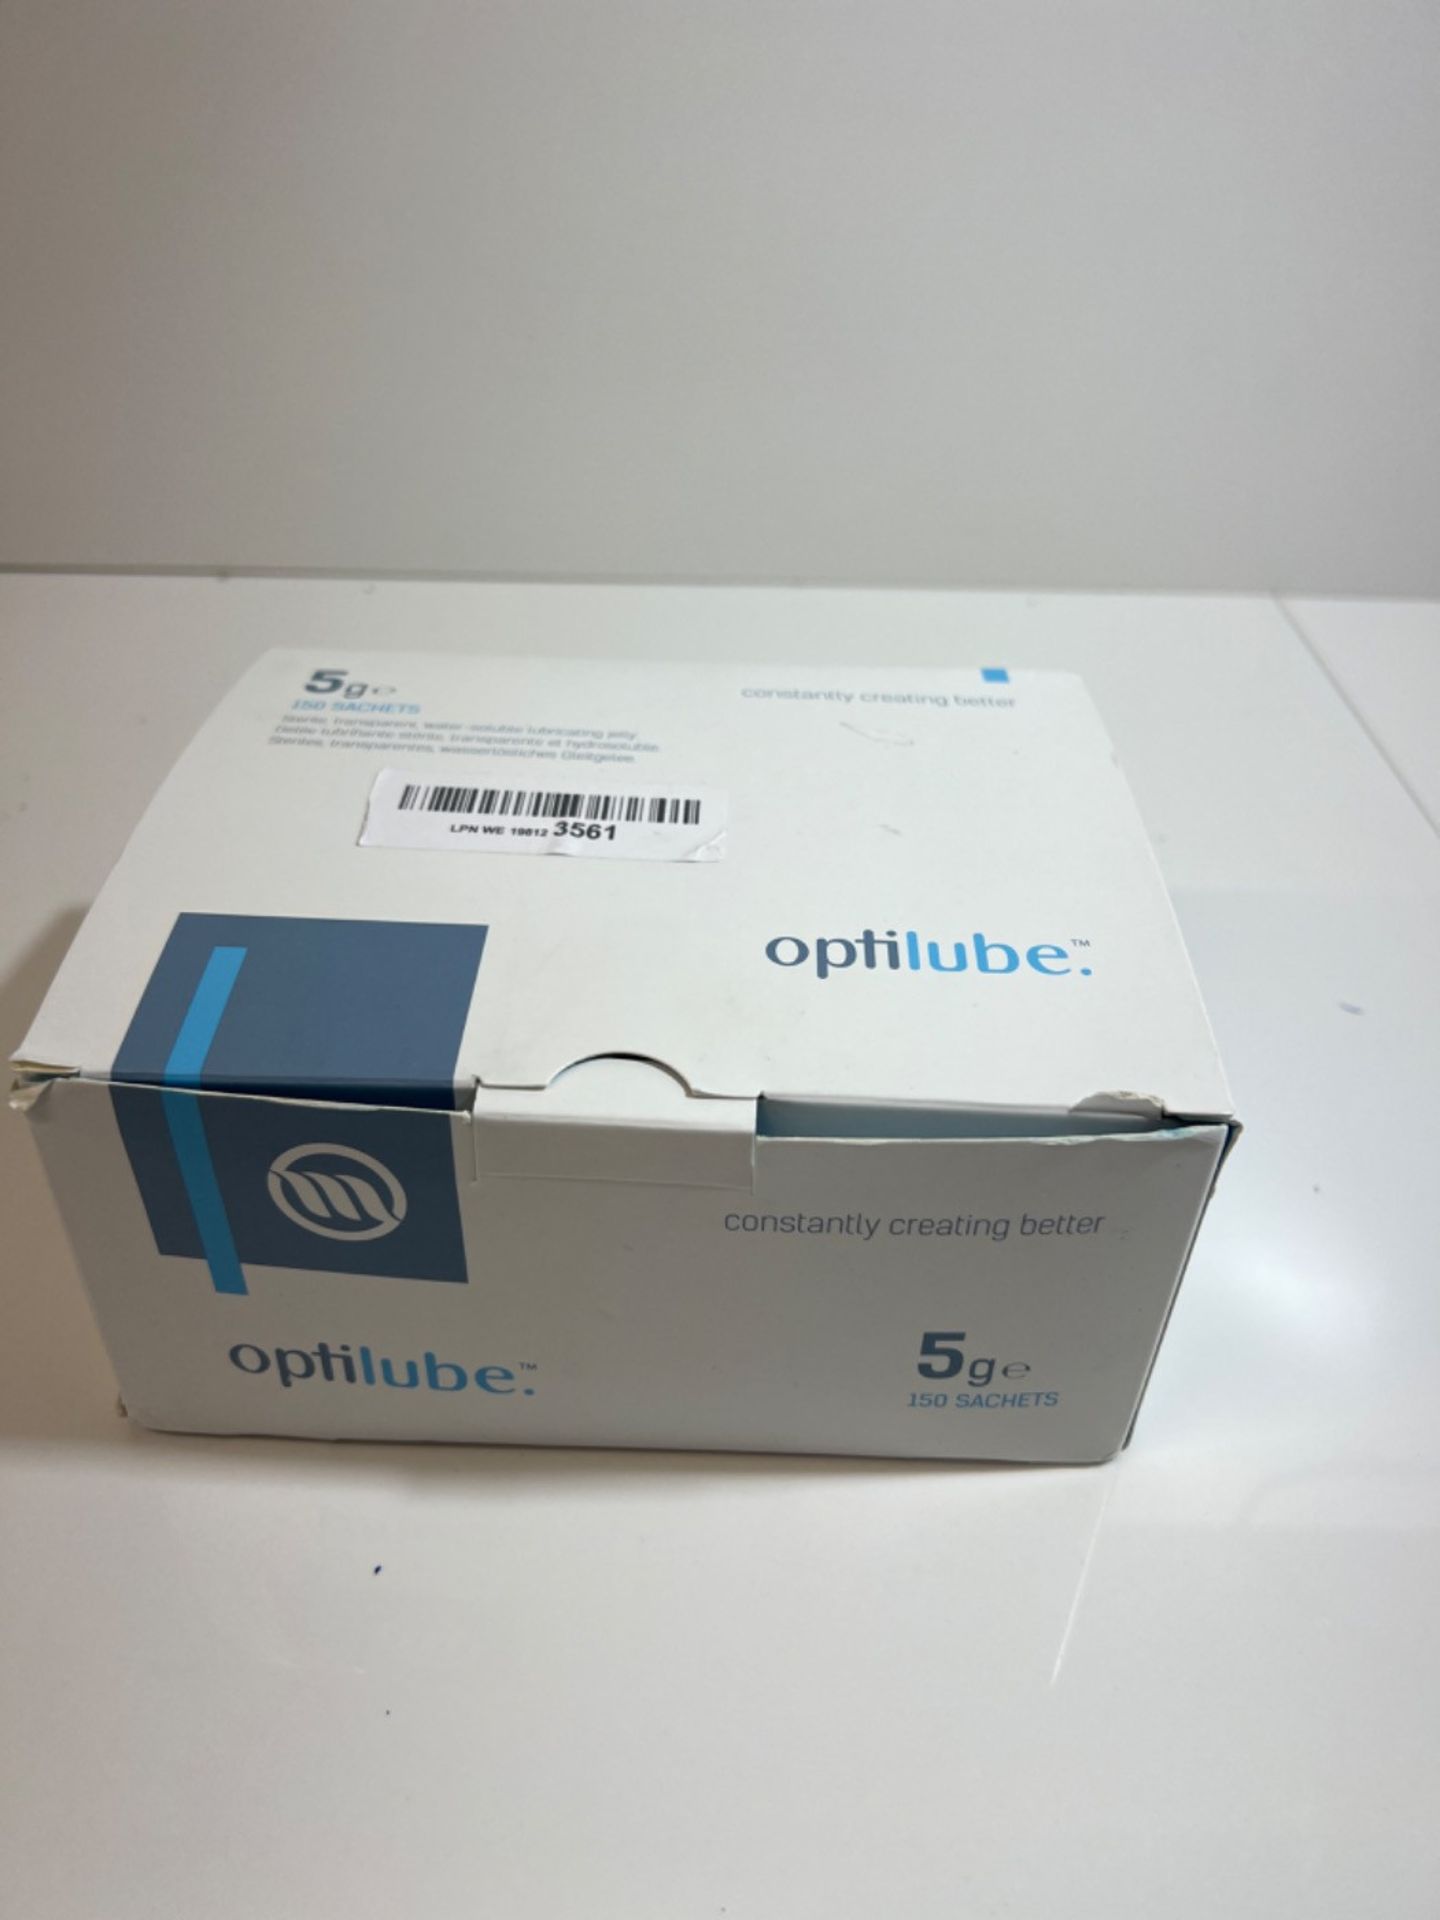 OptiLube Sachets (5g x150) - Sterile Lubricating Jelly in Sachets, Water Soluble with Easy Tear Pac - Image 3 of 3